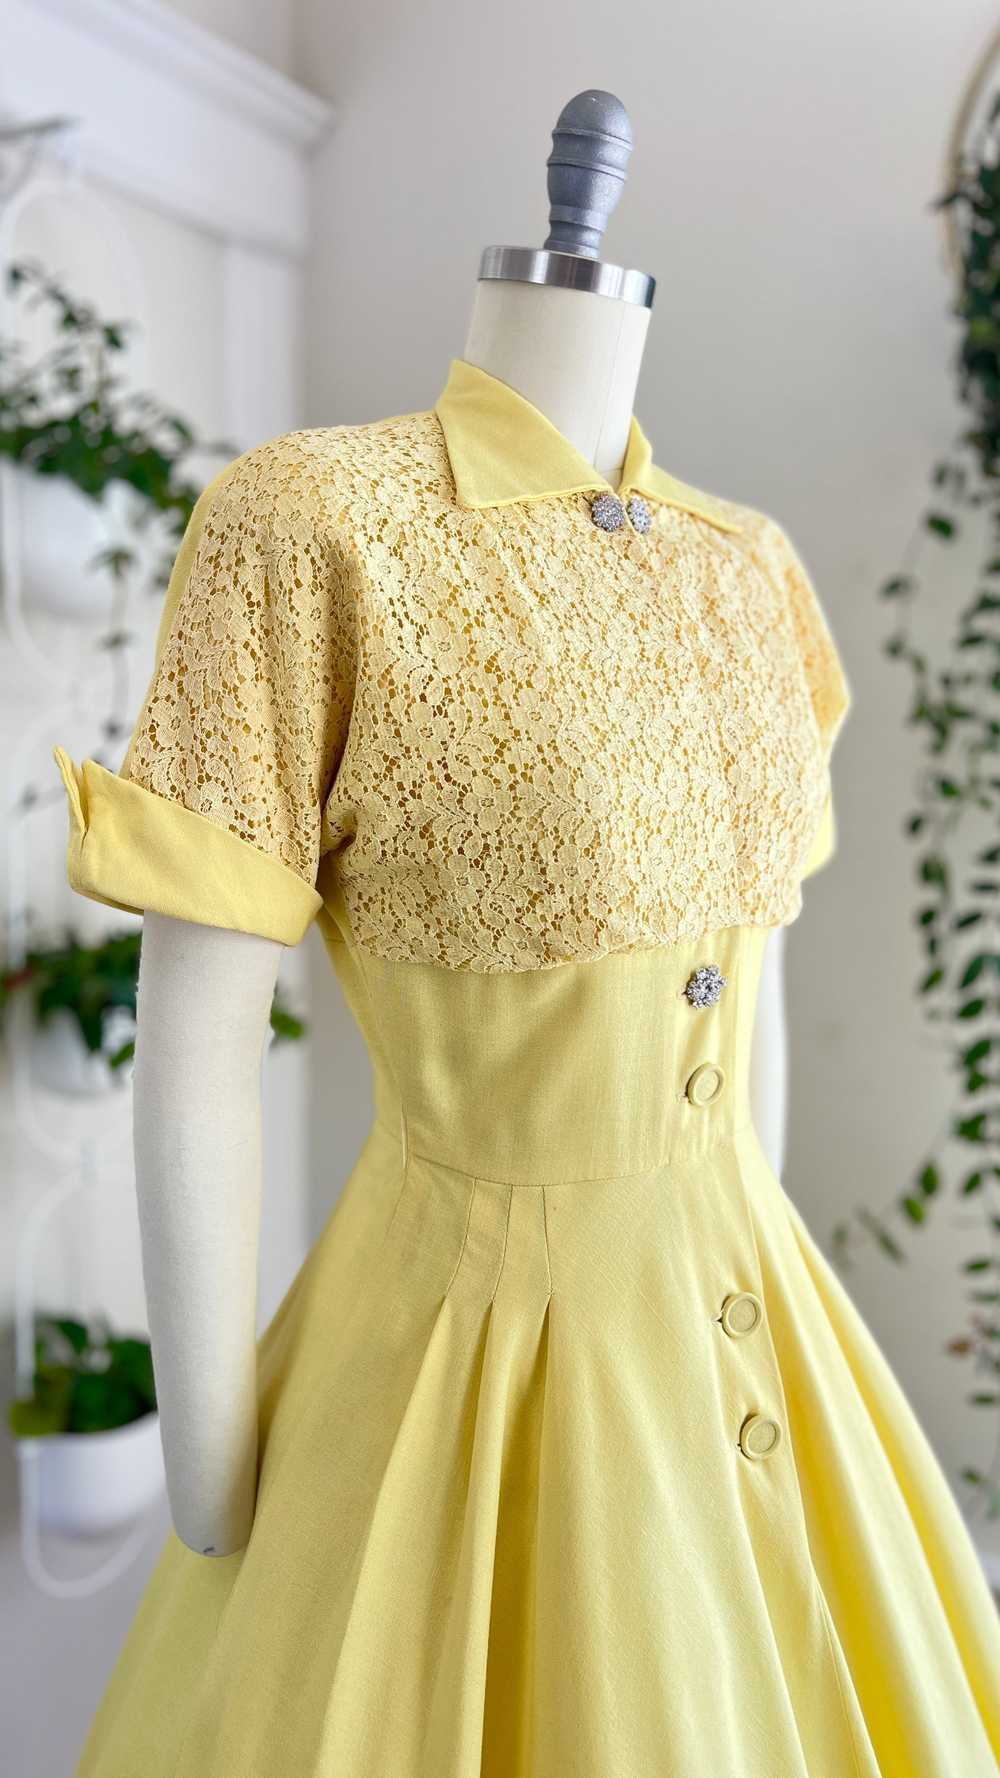 1950s Linen & Lace Dress | x-small/small - image 2